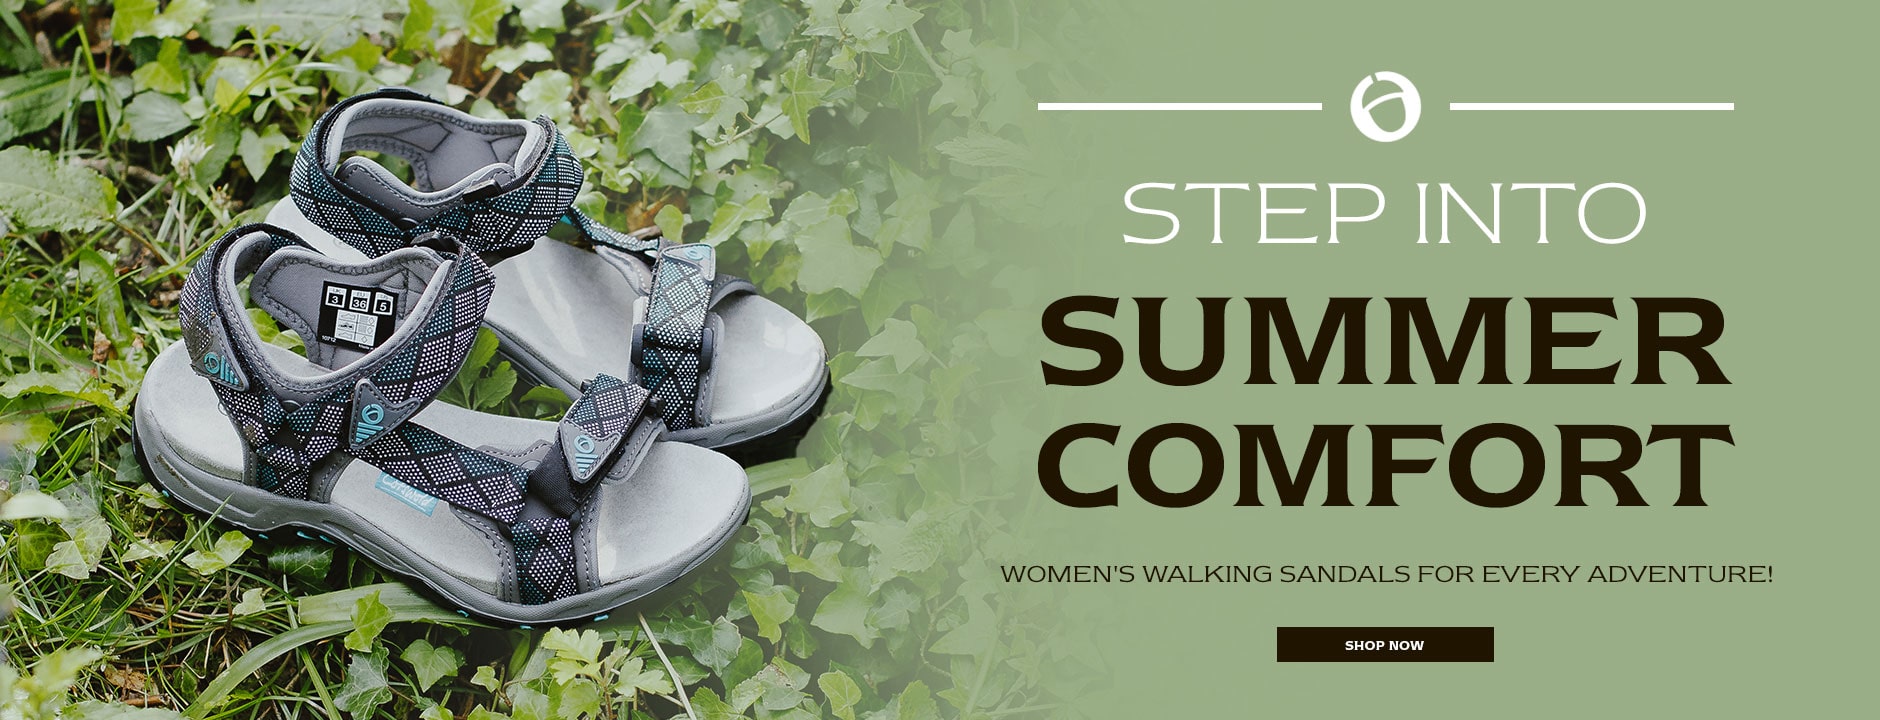 A pair of Cotswold Foxcote sandals placed on ivy. Text reads 'STEP INTO SUMMER COMFORT. WOMEN'S WALKING SANDALS FOR EVERY ADVENTURE! SHOP NOW.'